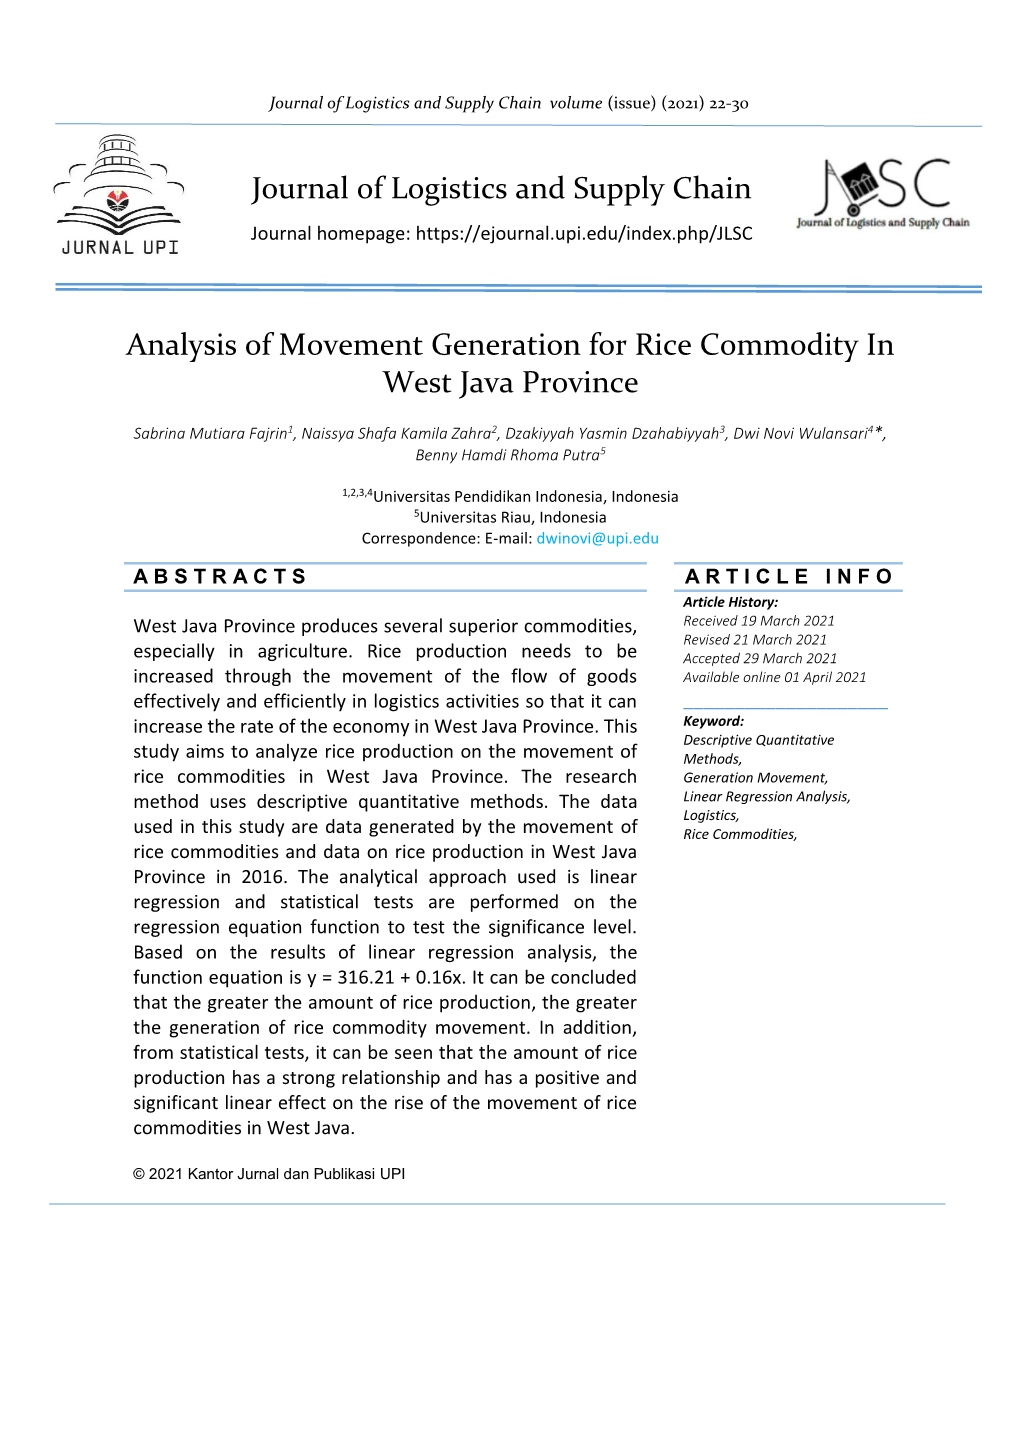 Analysis of Movement Generation for Rice Commodity in West Java Province